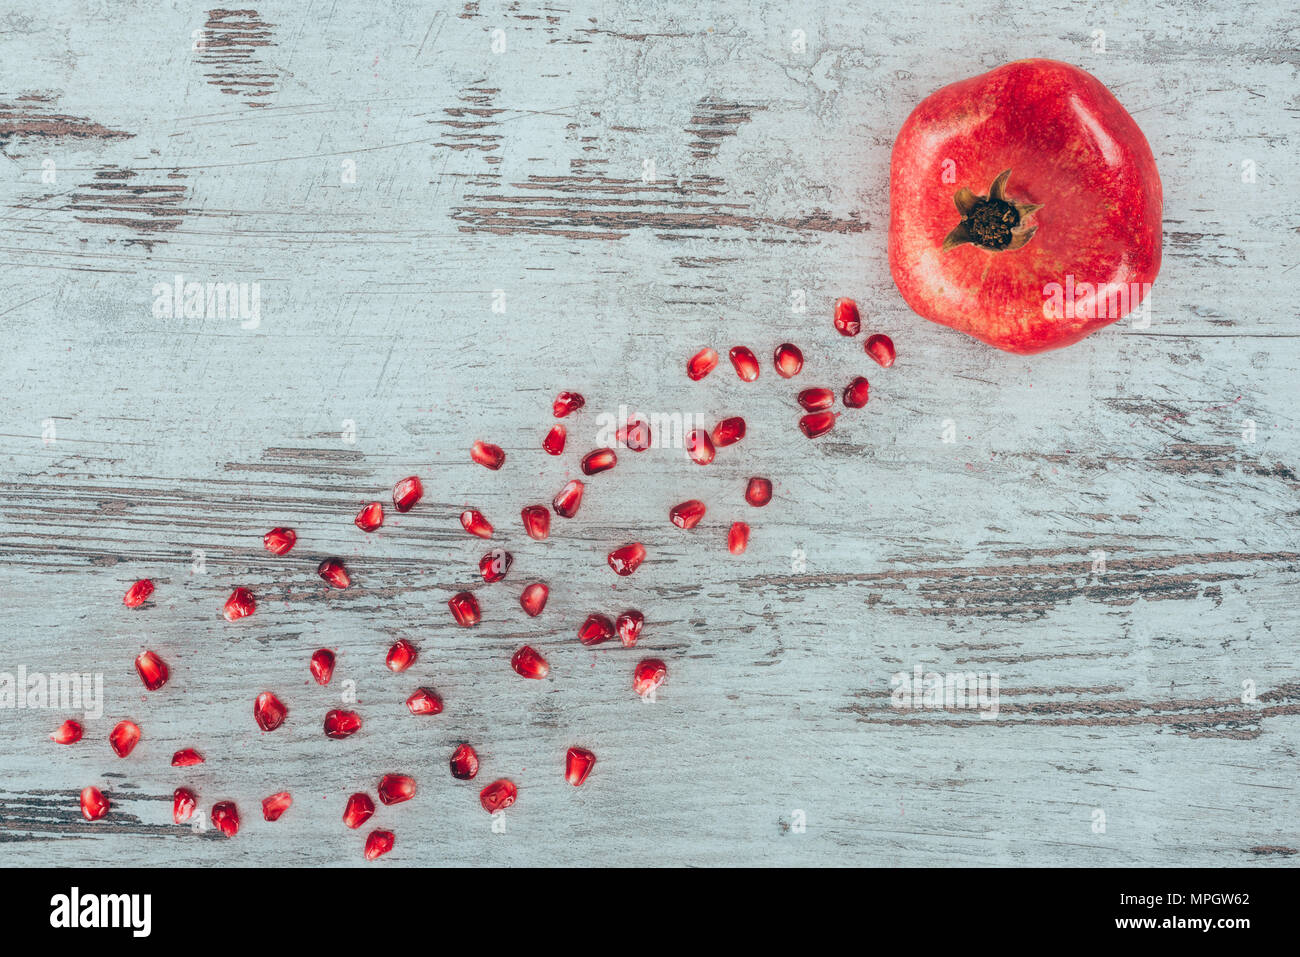 Pomegranate with seeds on wooden surface Stock Photo